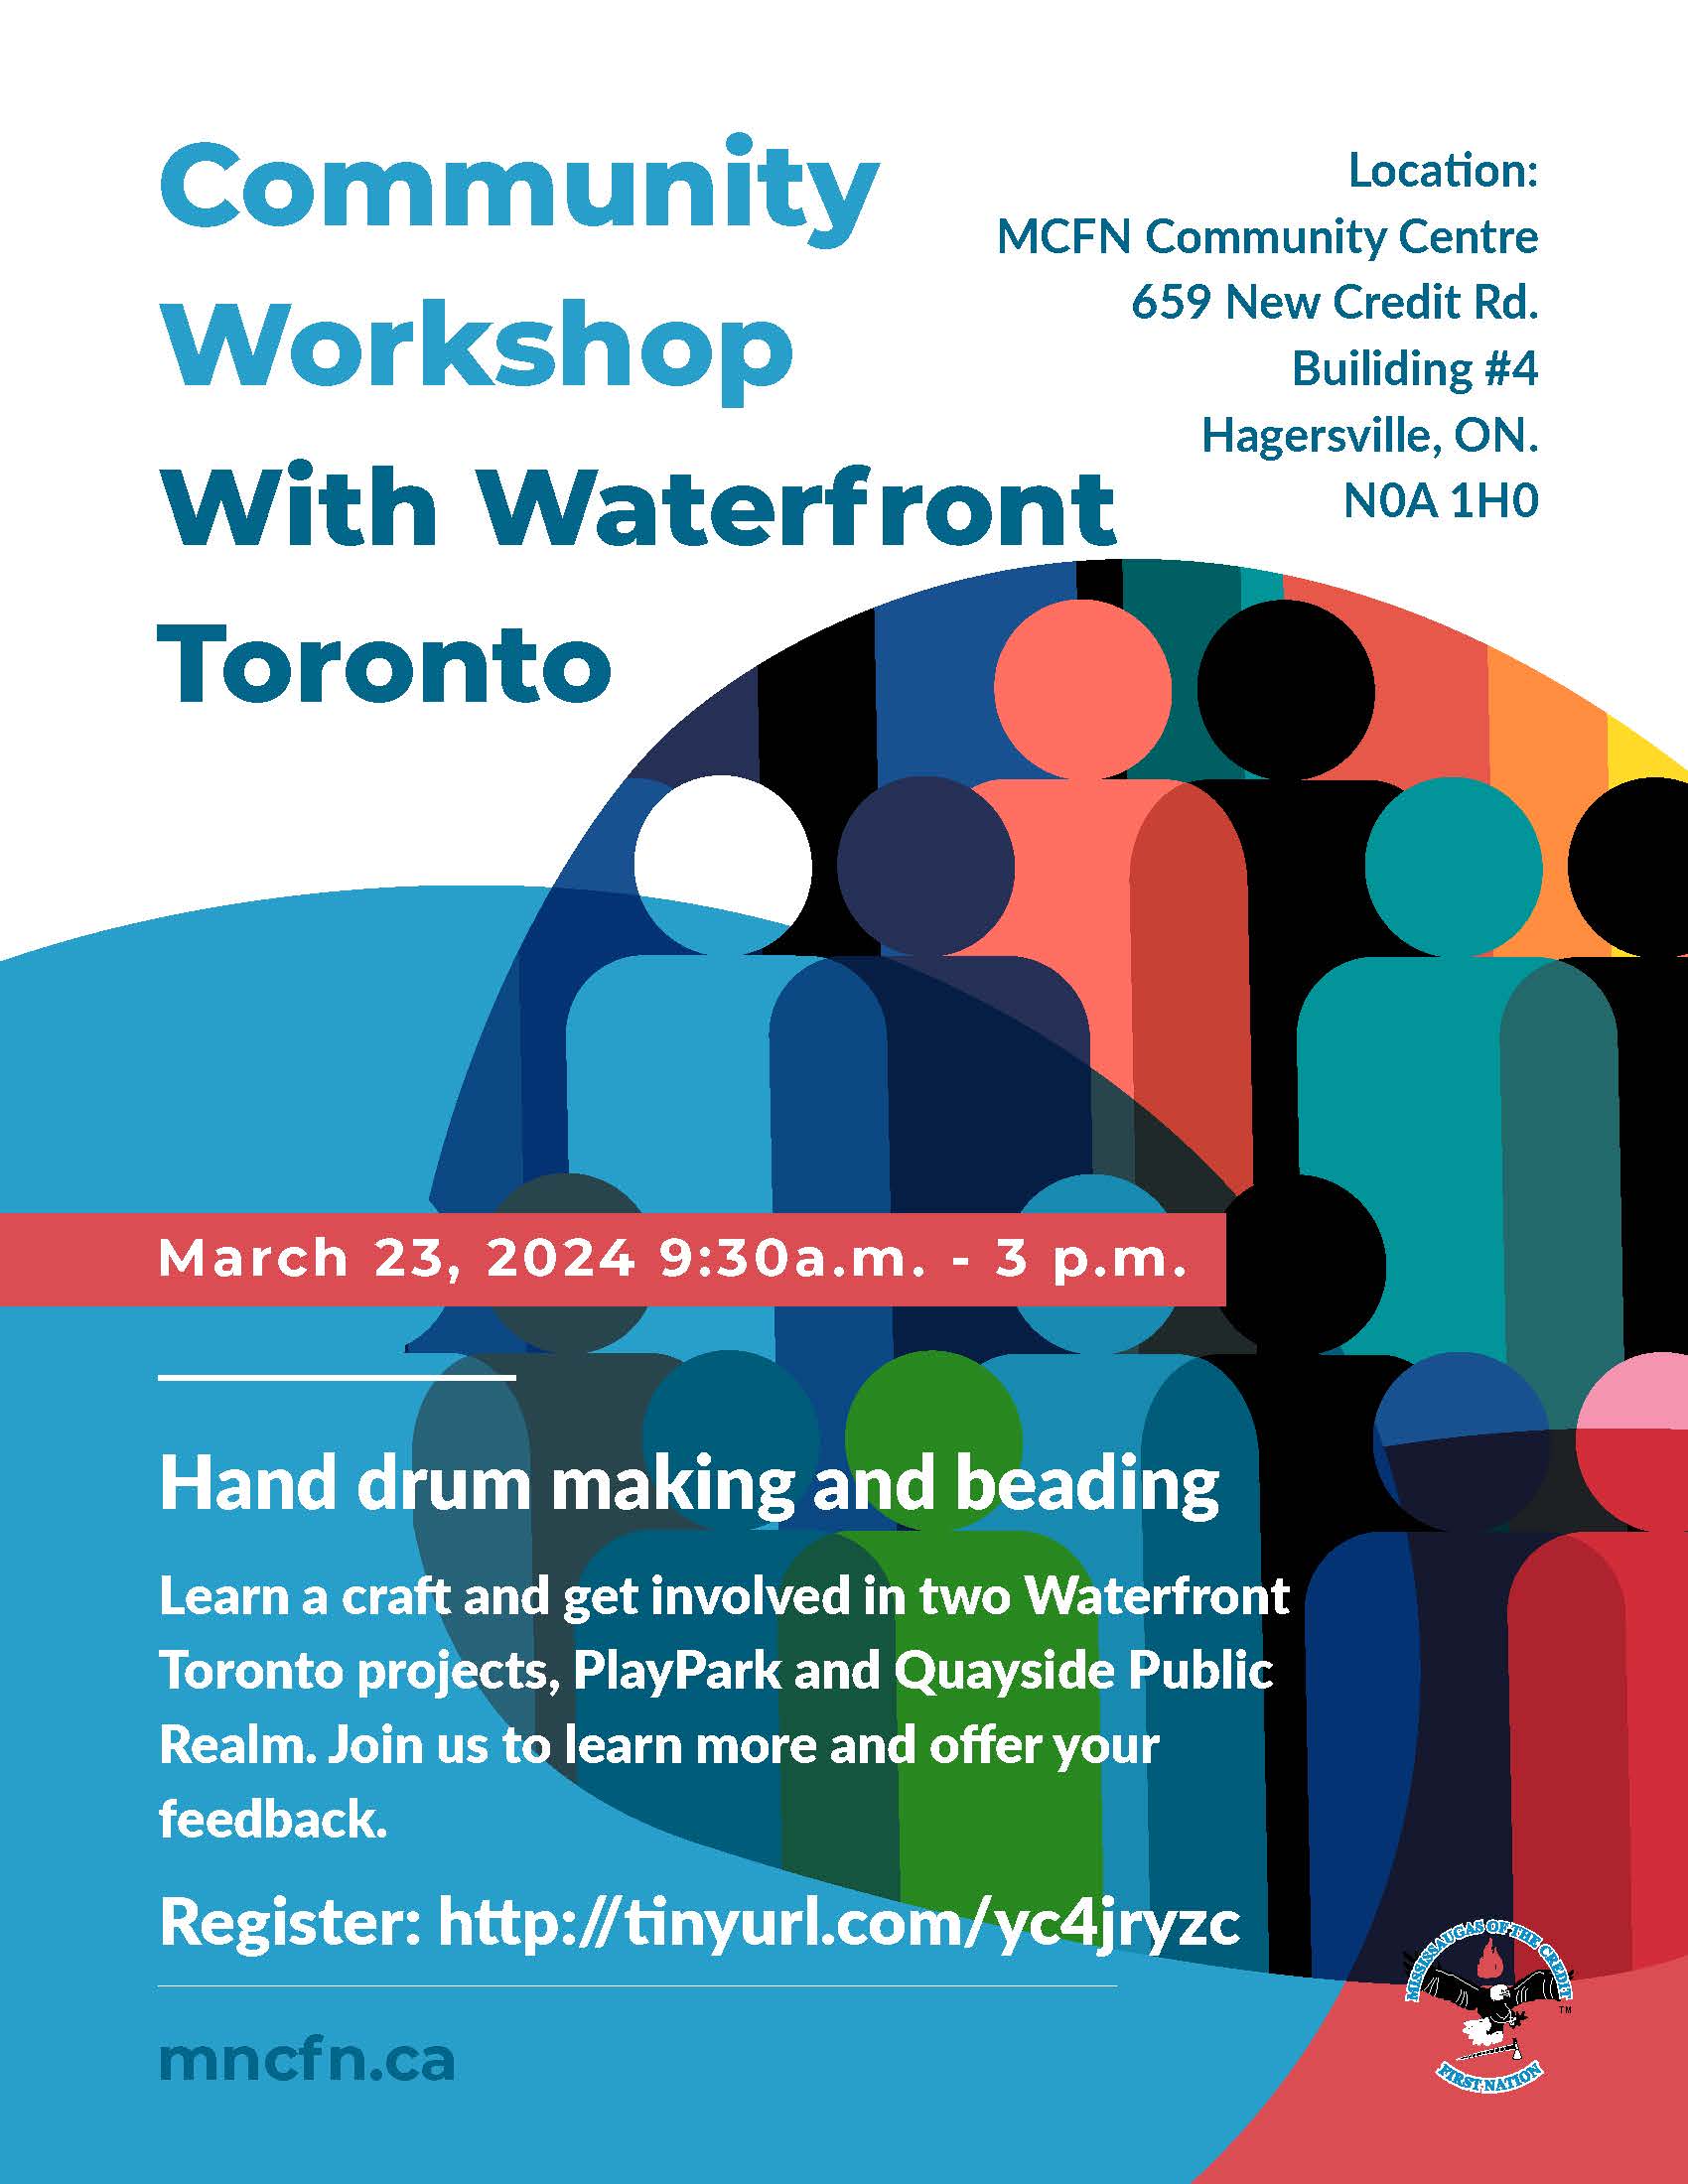 Community Workshop with Waterfront Toronto